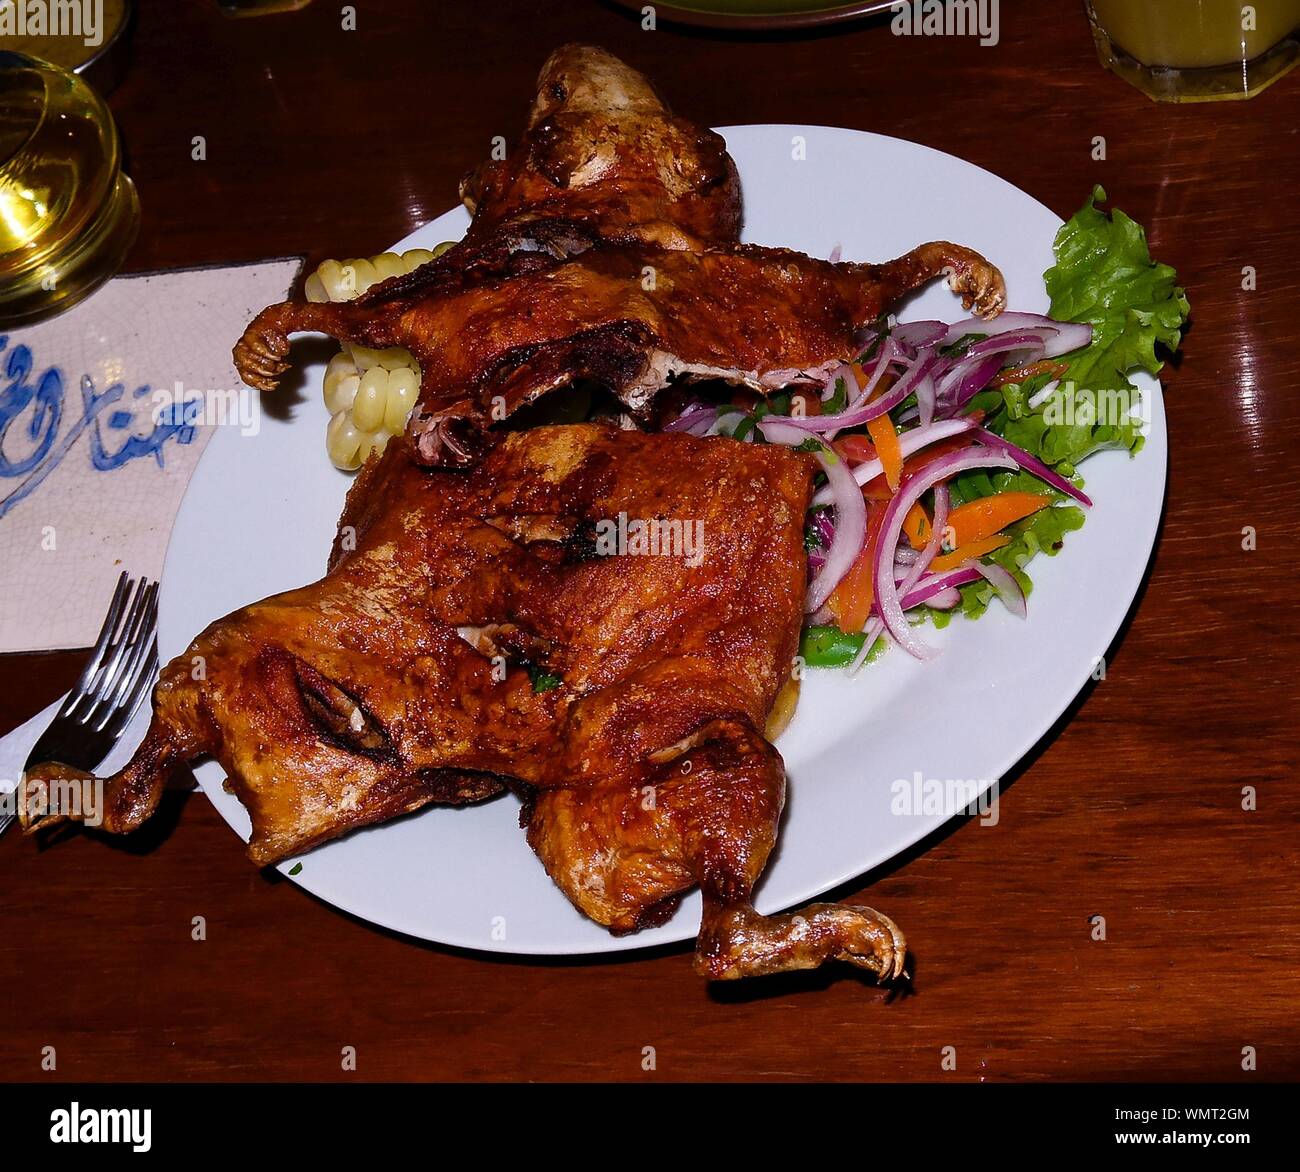 Close-up view to grilled cuy aka Guinea pig, Traditional peruvian dish with salad Arequipa, Peru Stock Photo